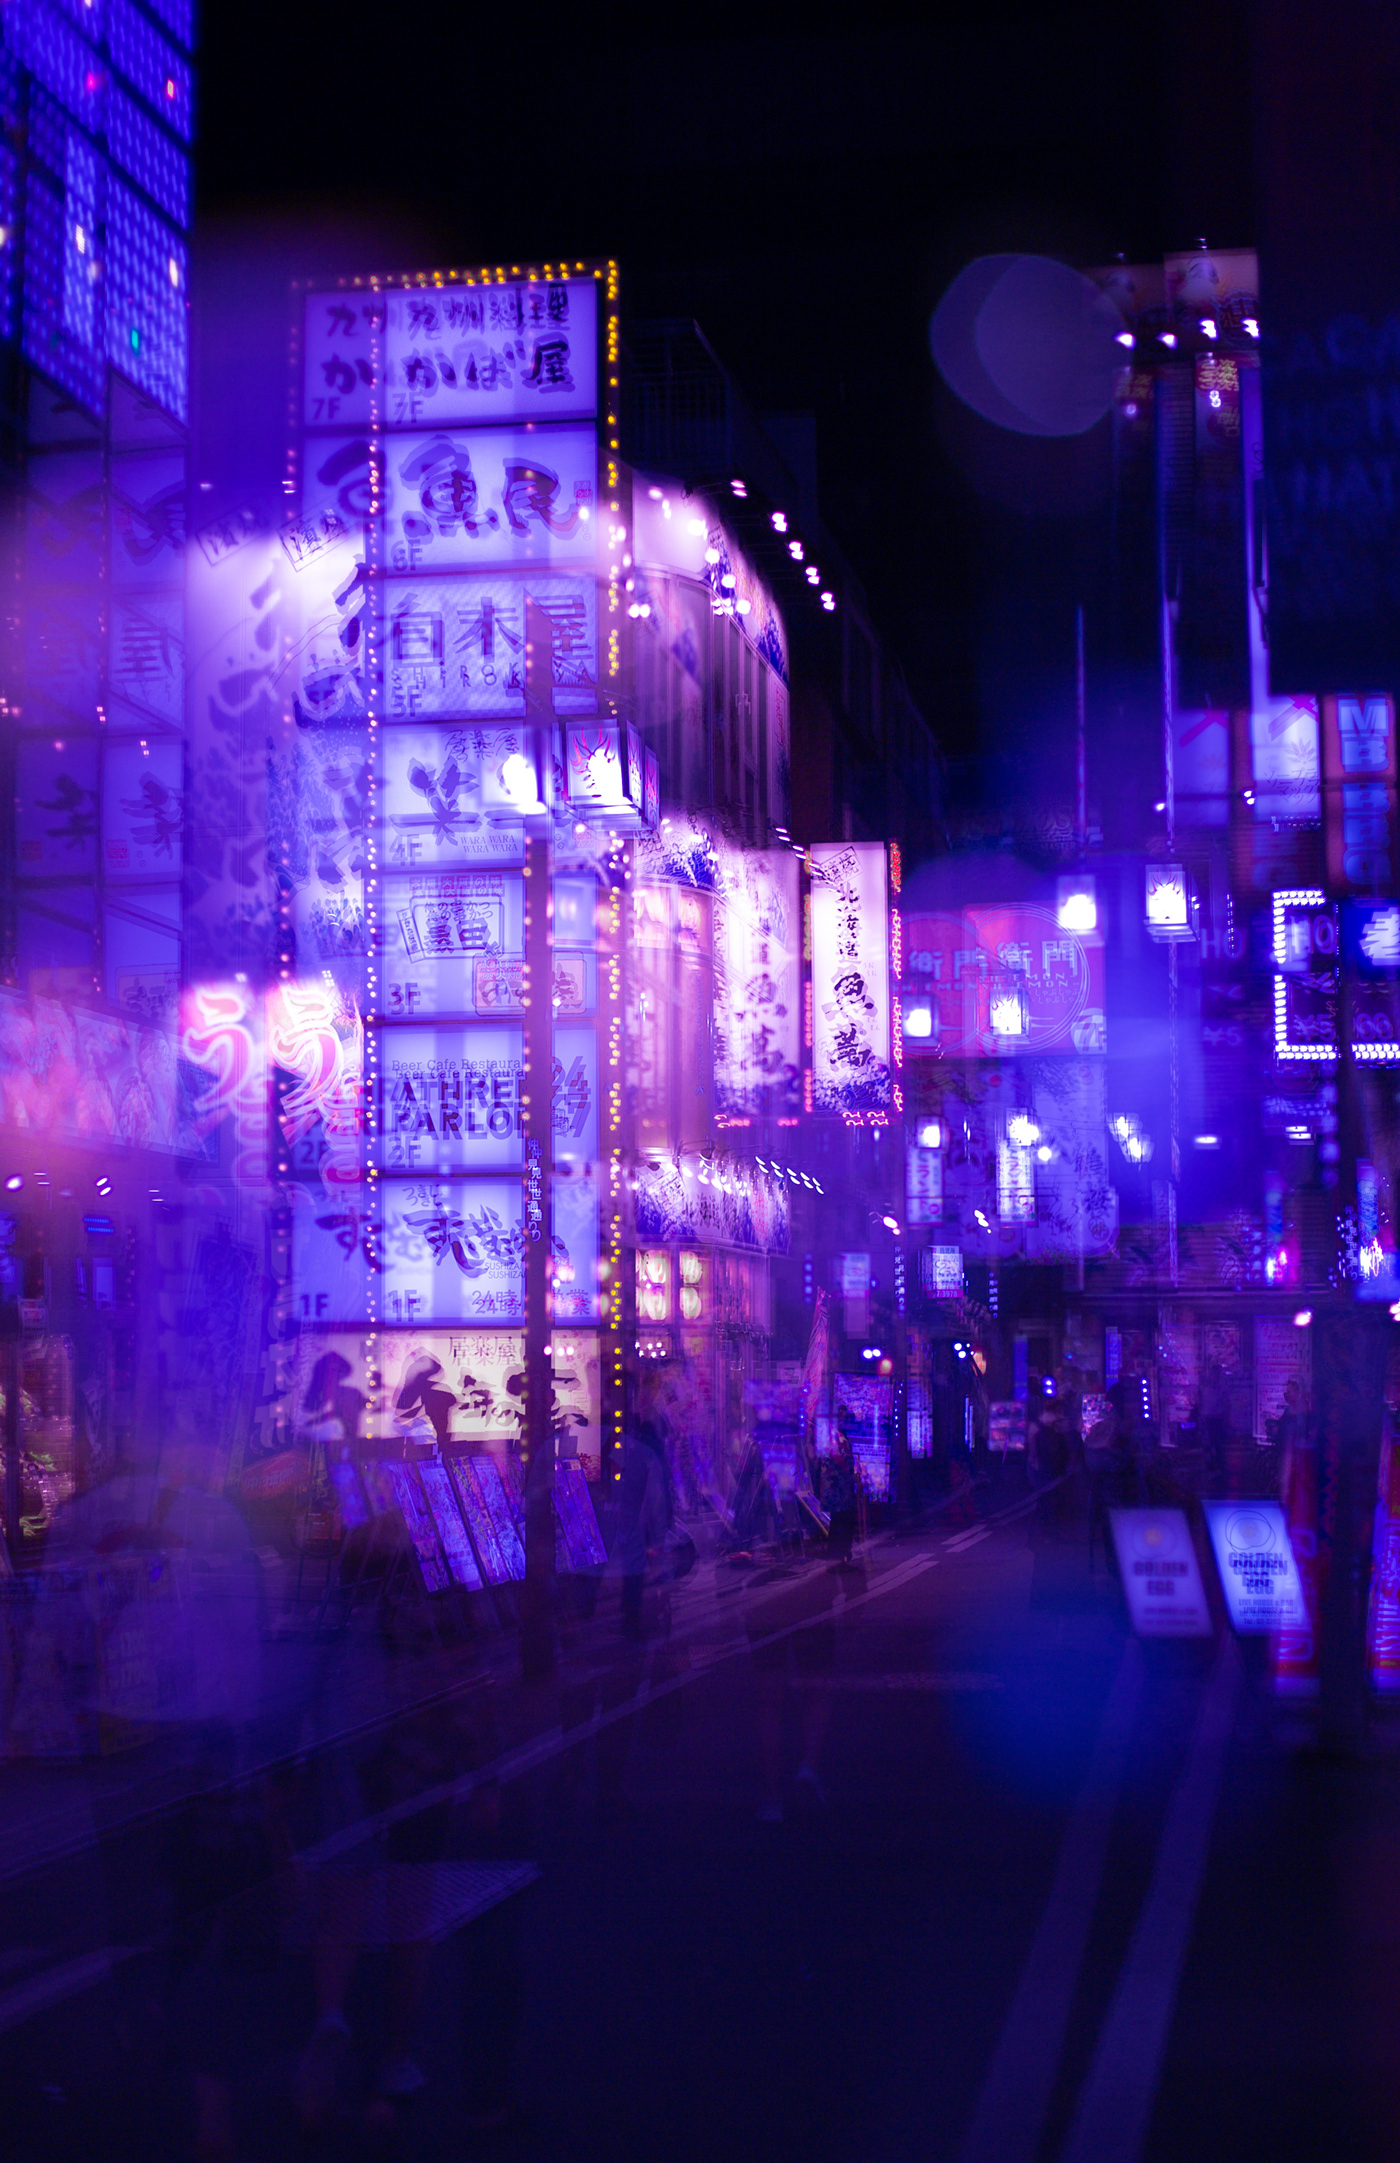 tokyo multiple exposure Canon blade runner sci-fi Photography  cinematography DOP